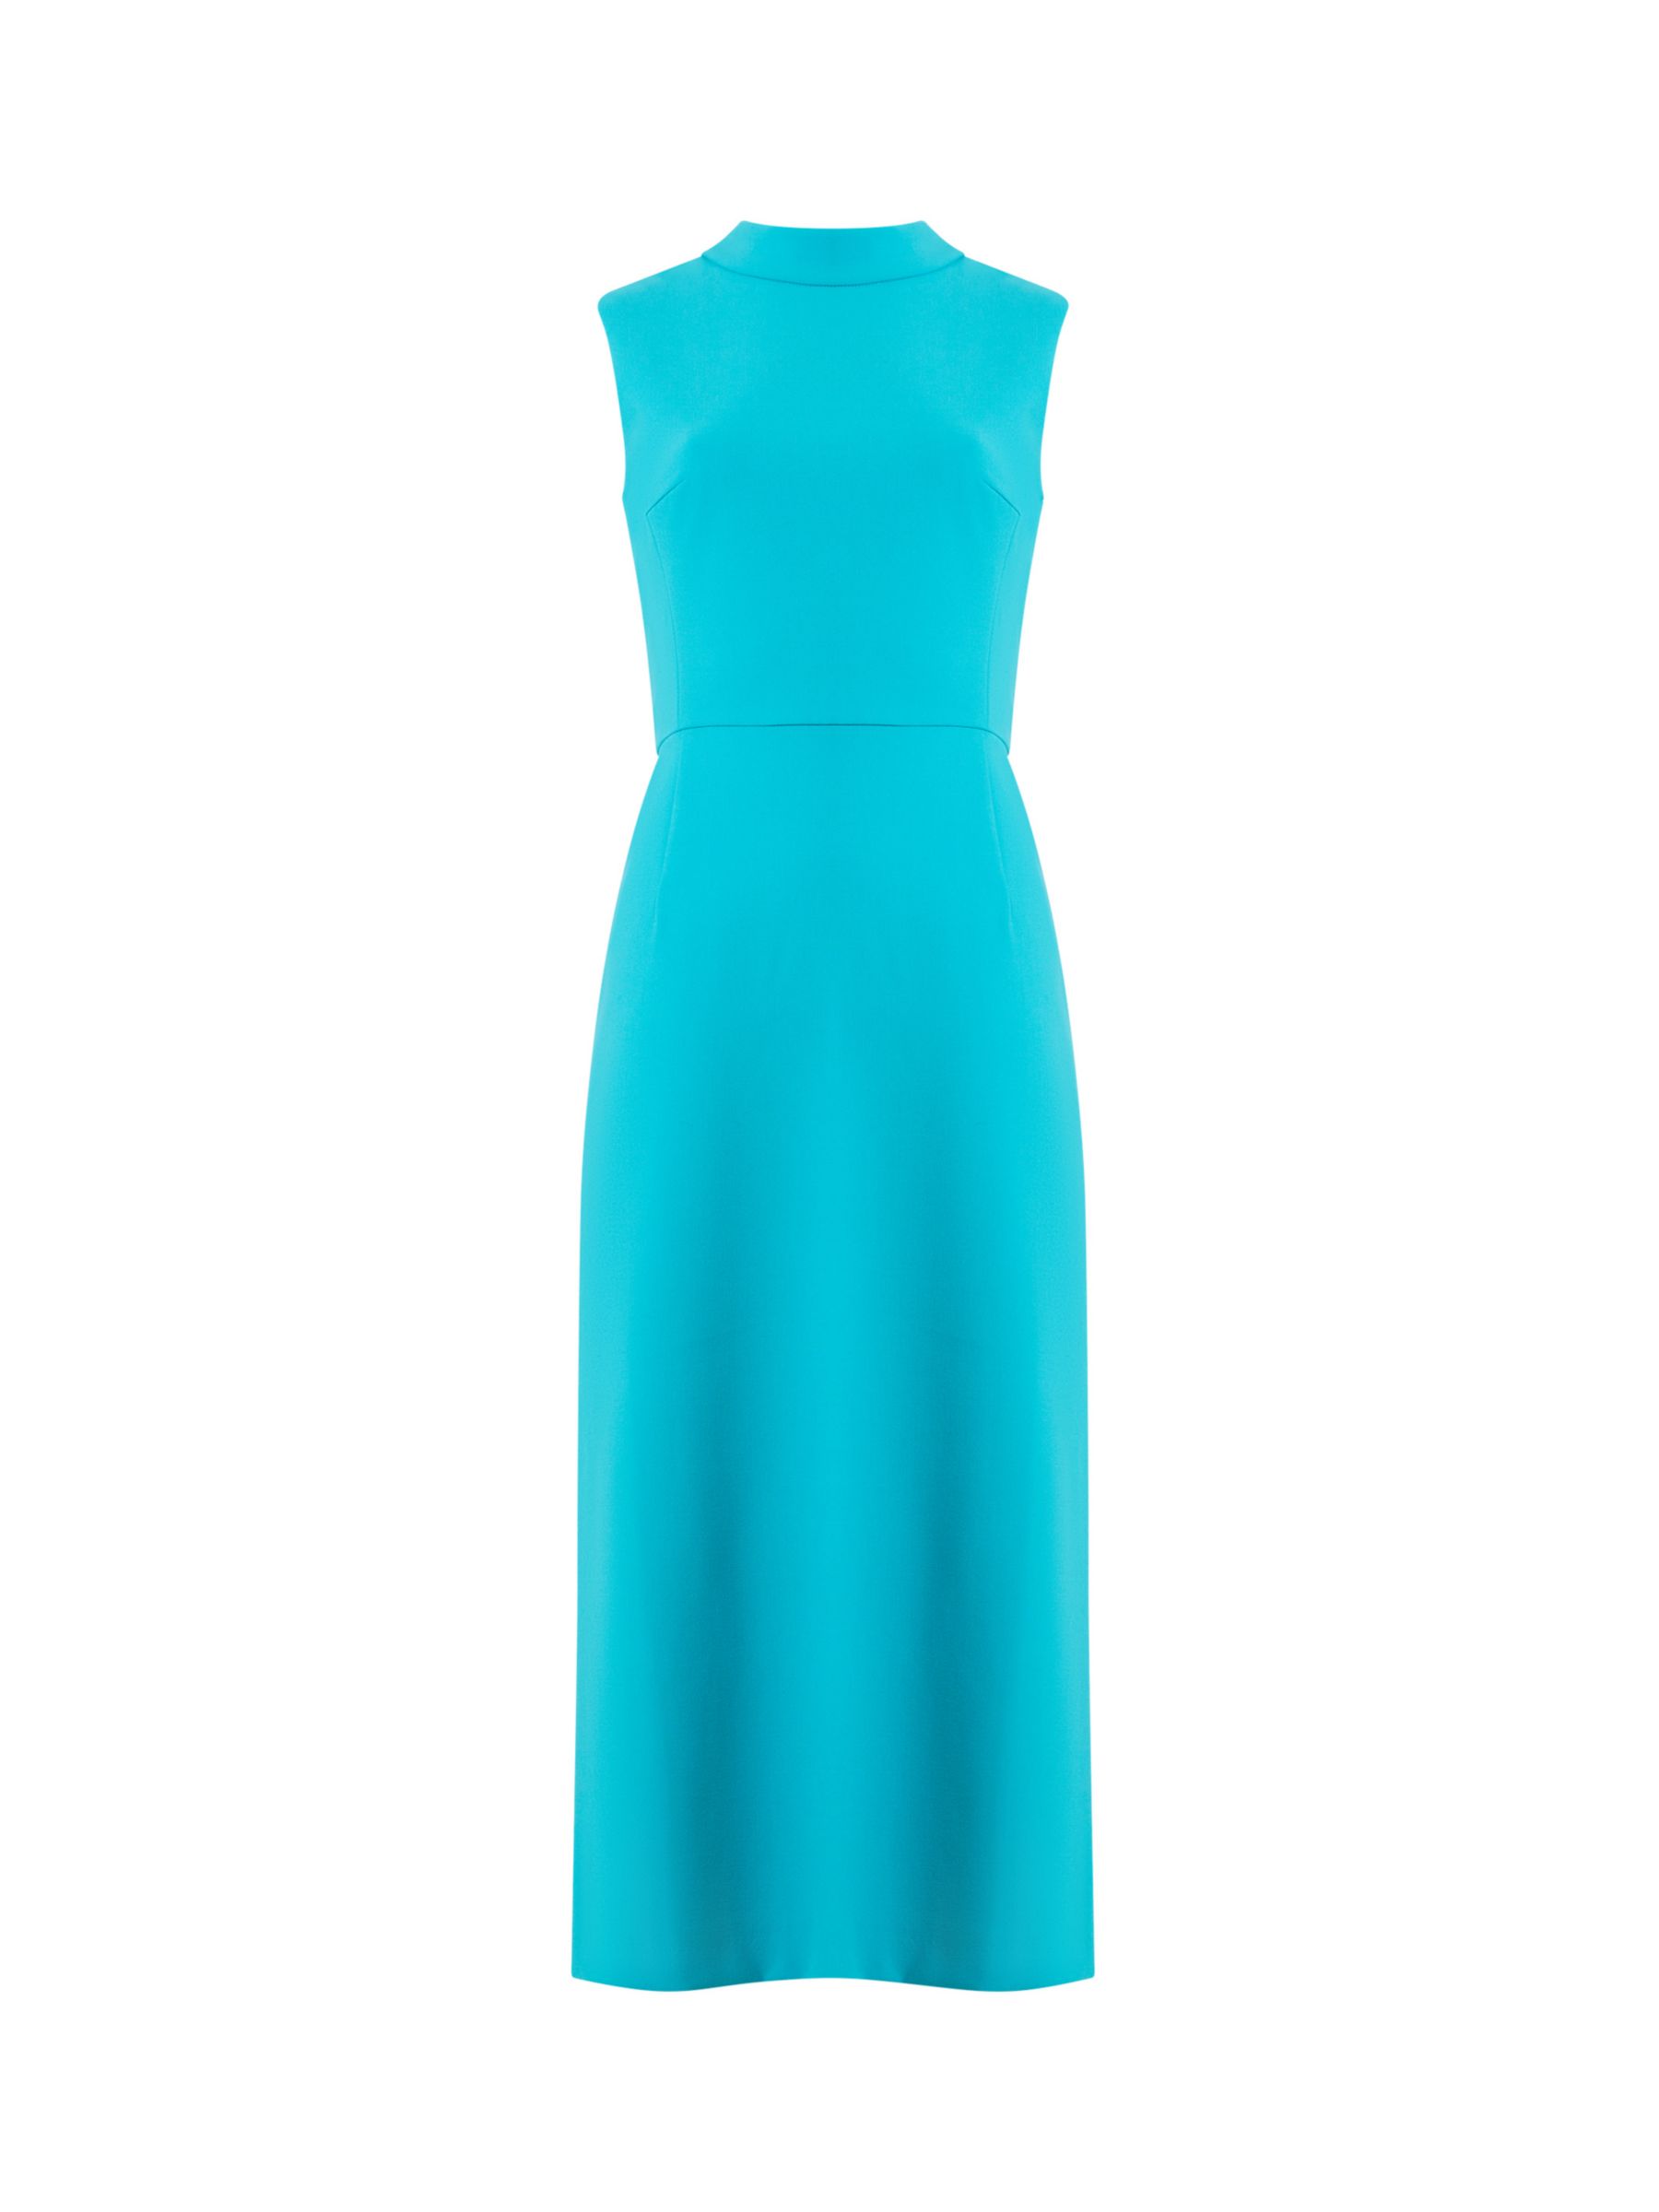 French Connection Echo Crepe Mock Neck Dress, Jaded Teal at John Lewis ...